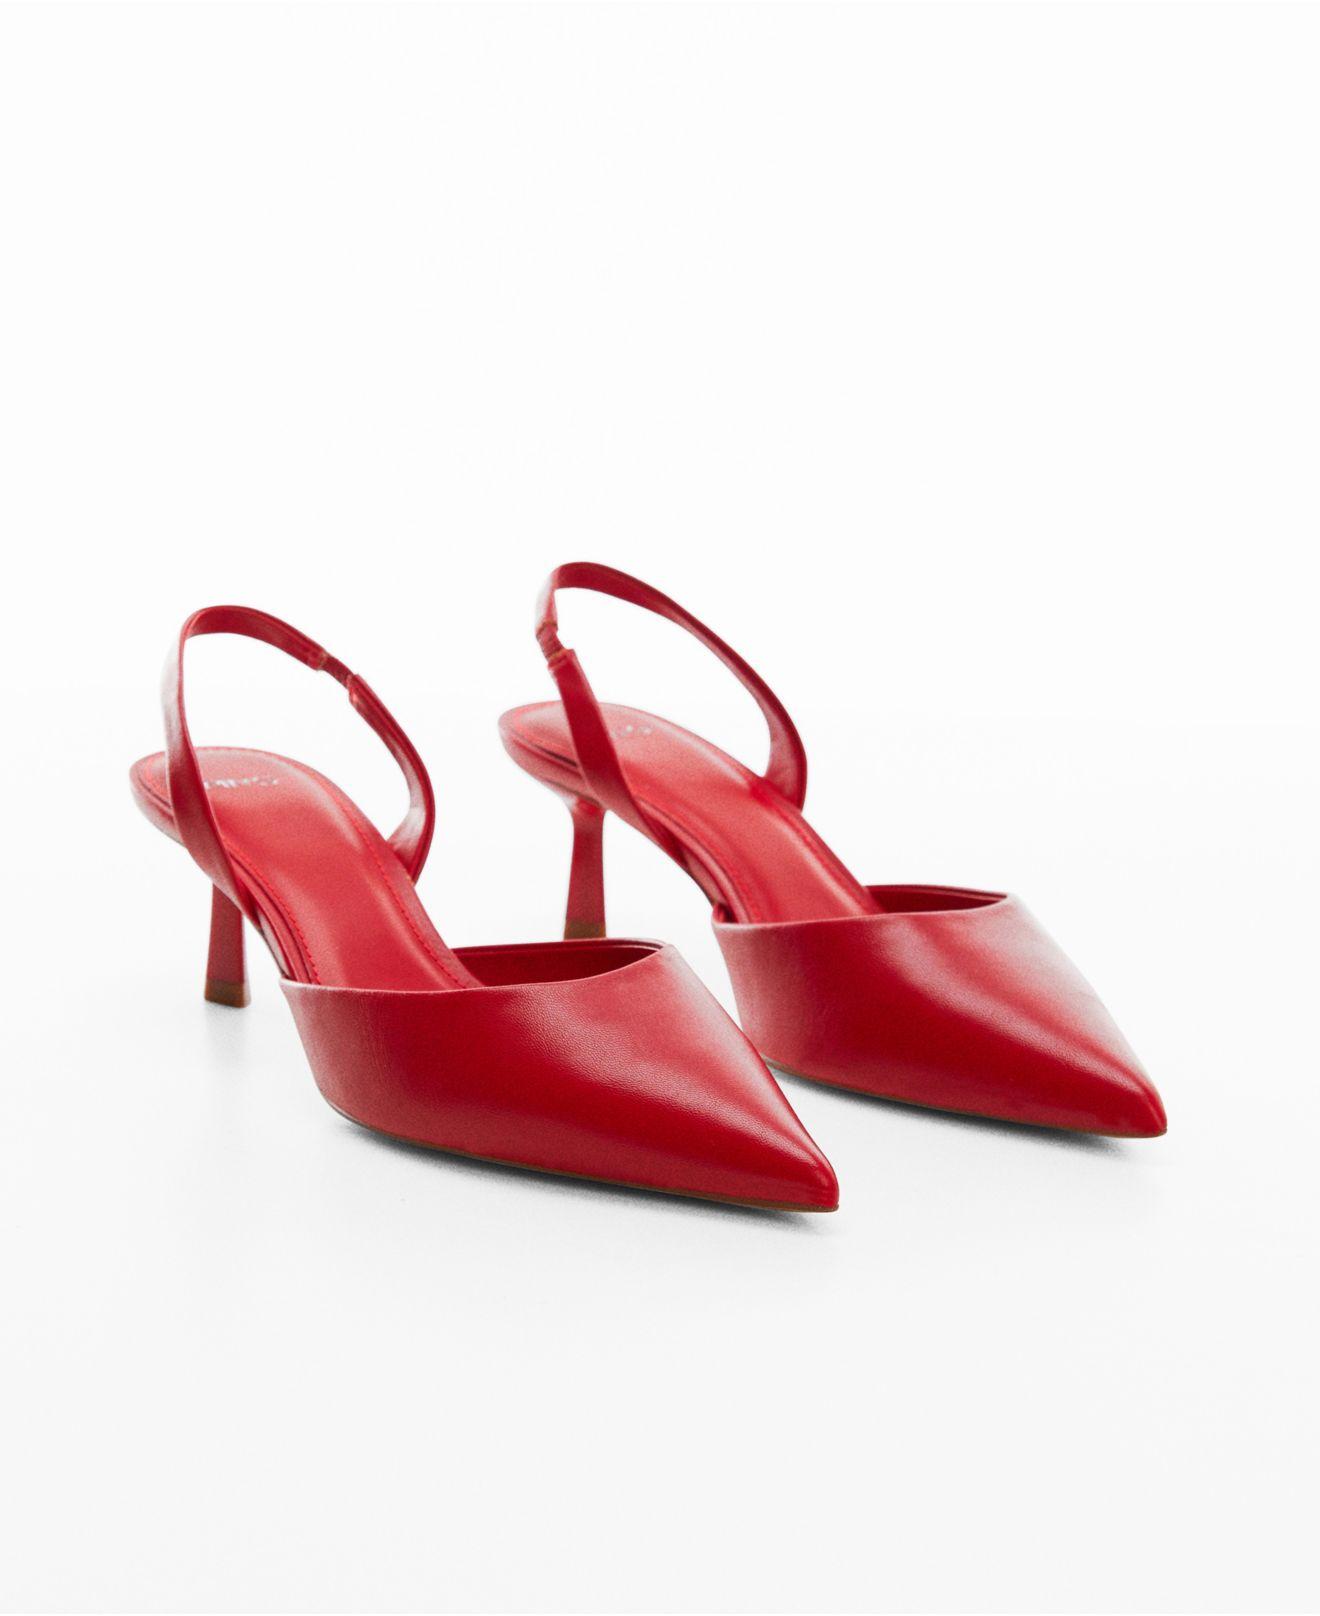 Mango Sling Back Heel Shoes in Red | Lyst